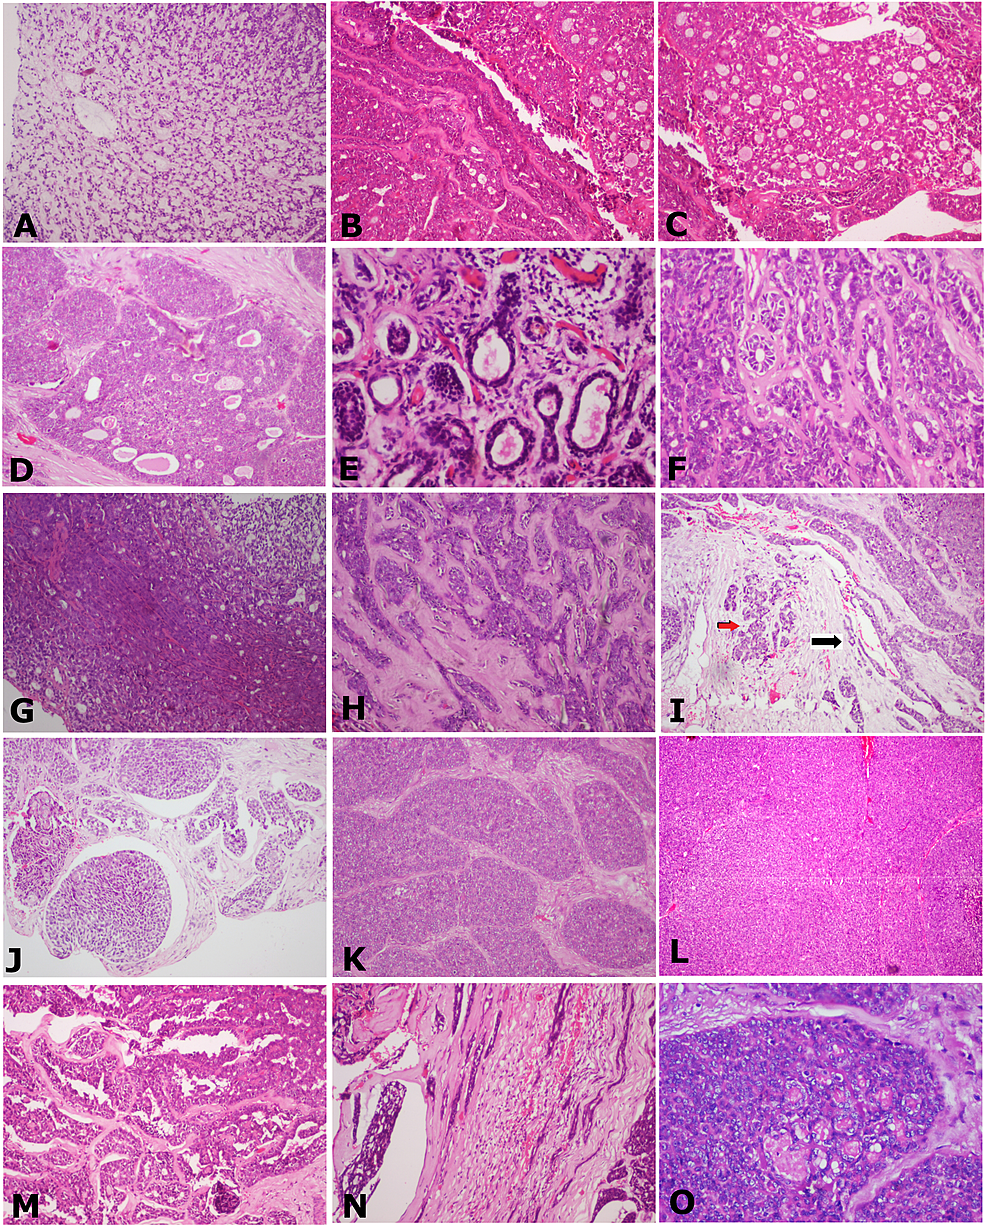 The-cells-arranged-in-various-patterns-such-as-(A)-Filigree,-H&E-staining,-x40.-(B)-Ribbon-and-cribriform,-H&E-staining,-x40.-(C)-Cribriform,-H&E-staining,-x40.-(D)-Pseudocribriform,-H&E-staining,-x40.-(E)-Ducts-and-tubules,-H&E-staining,-x100.-(F)-Tubular-pattern,-H&E-staining,-x40.-(G)-Layered-tubular,-H&E-staining,-x100.-(H)-Trabecular,-H&E-staining,-x40.-(I)-Strands-(black-arrow),-nests-and-islands-(red-arrow),-H&E-staining,-x40.-(J)-Glomeruloid,-H&E-staining-x40.-(K)-Solid-organoid,-H&E-staining,-x40.-(L)-Solid-sheet-pattern,-H&E-staining,-x40.-(M)-Papillary-cystic,-H&E-staining,-x100.-(N)-Indian-file,-H&E-staining,-x40.-(O)-Rosette,-H&E-staining,-x100.